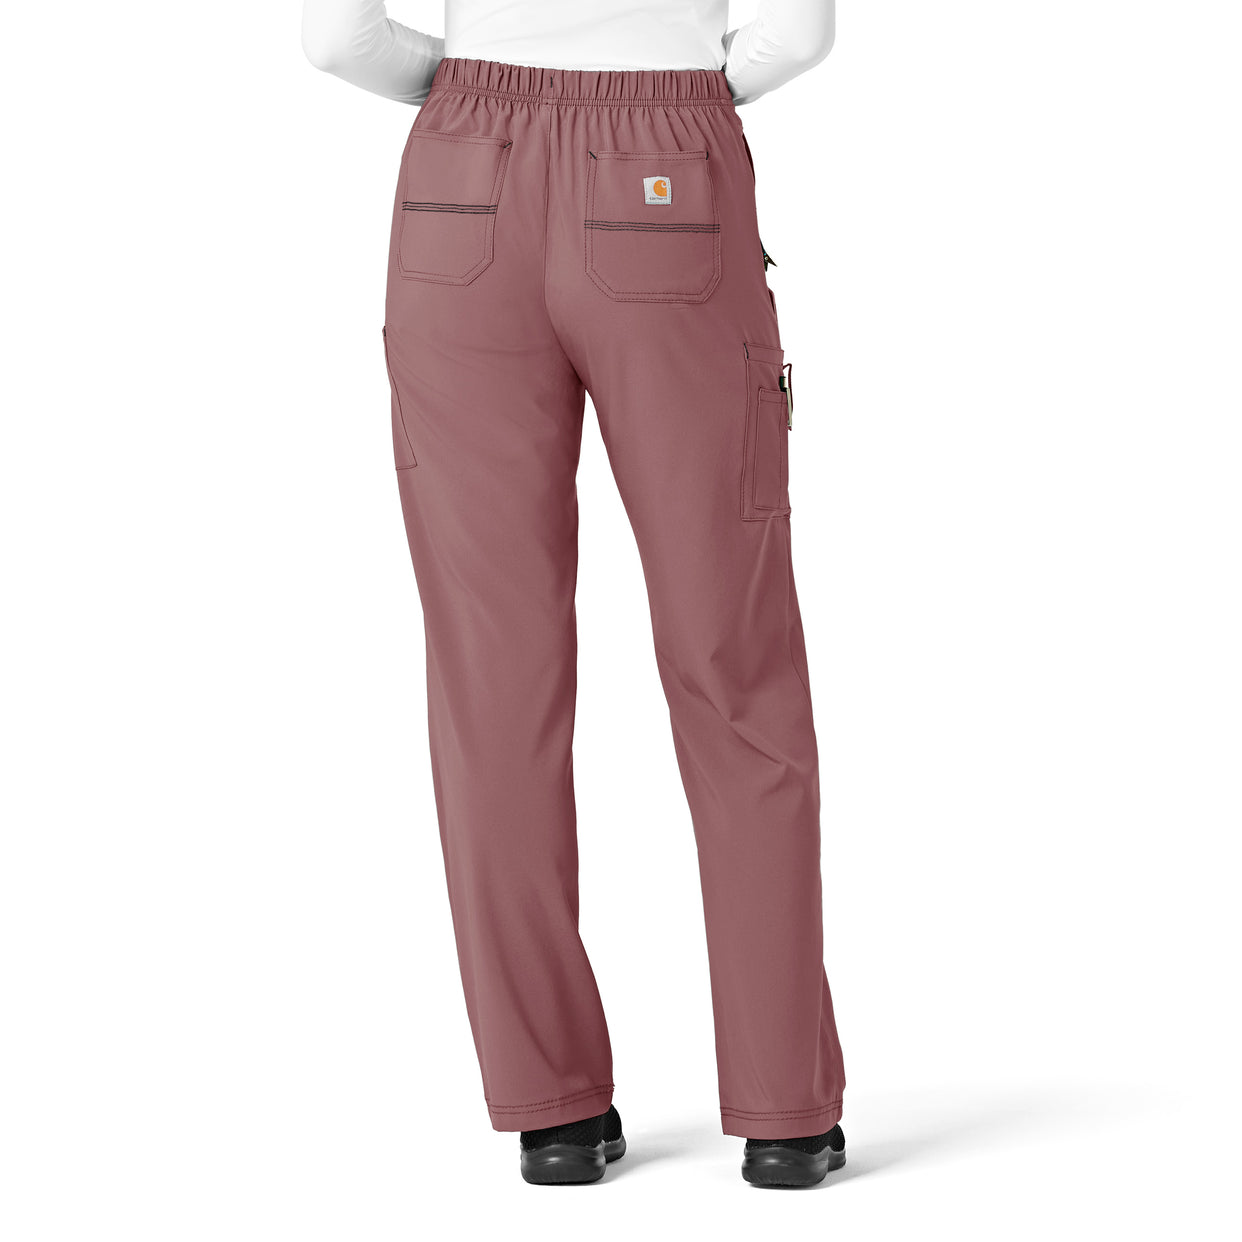 Carhartt WIP Pierce Brown Trousers | Carhartt women outfits pants, Carhartt  women's outfit, Fashion inspo outfits